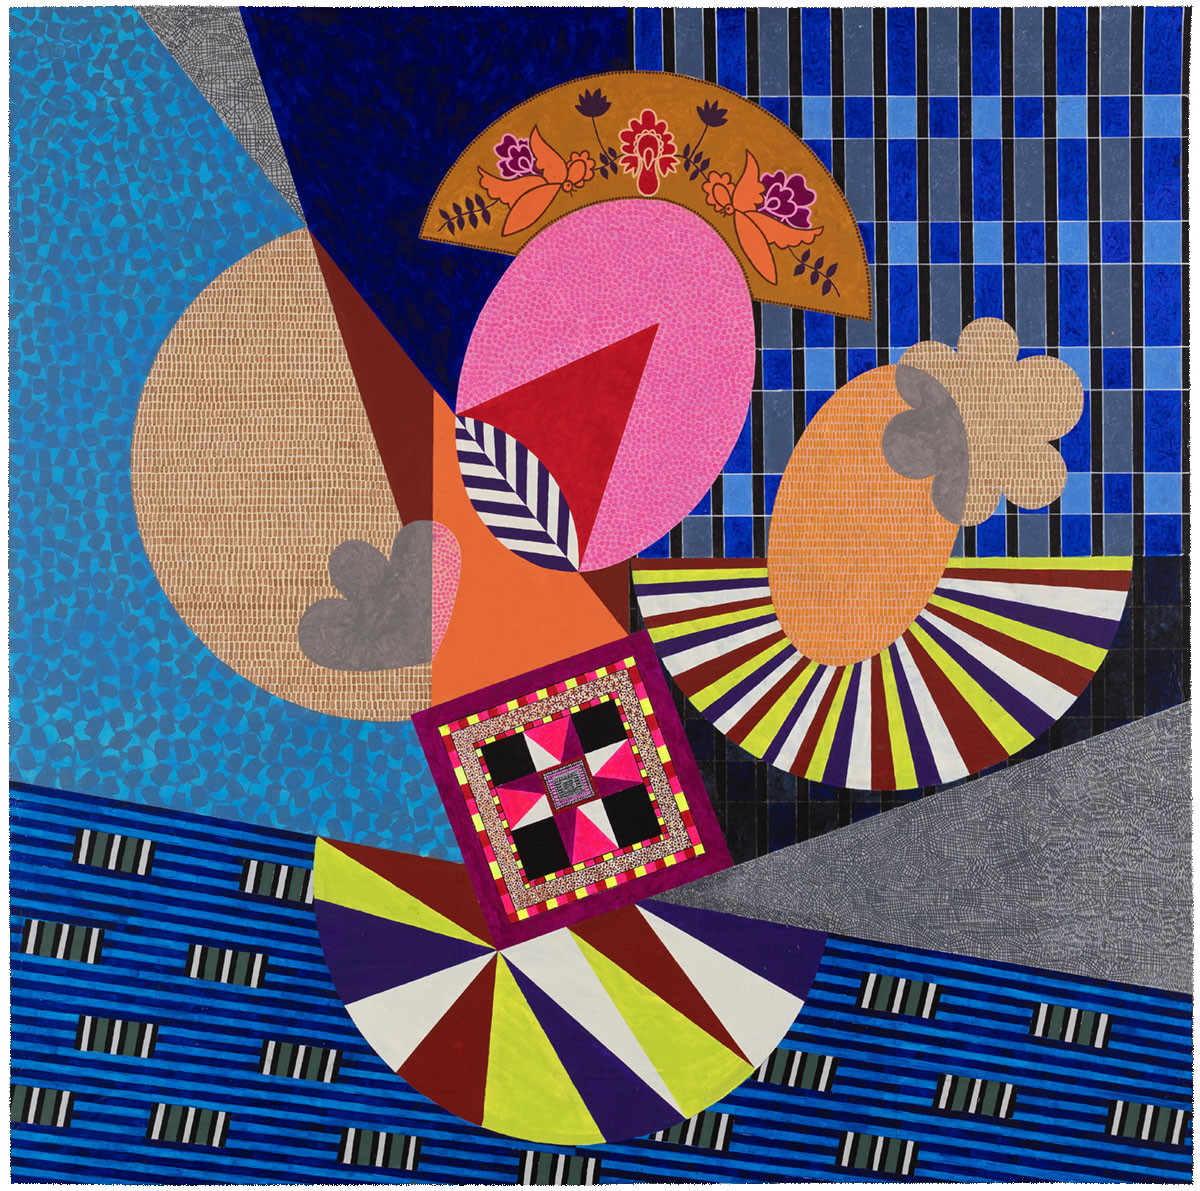 A brightly coloured painting comprising geometric shapes